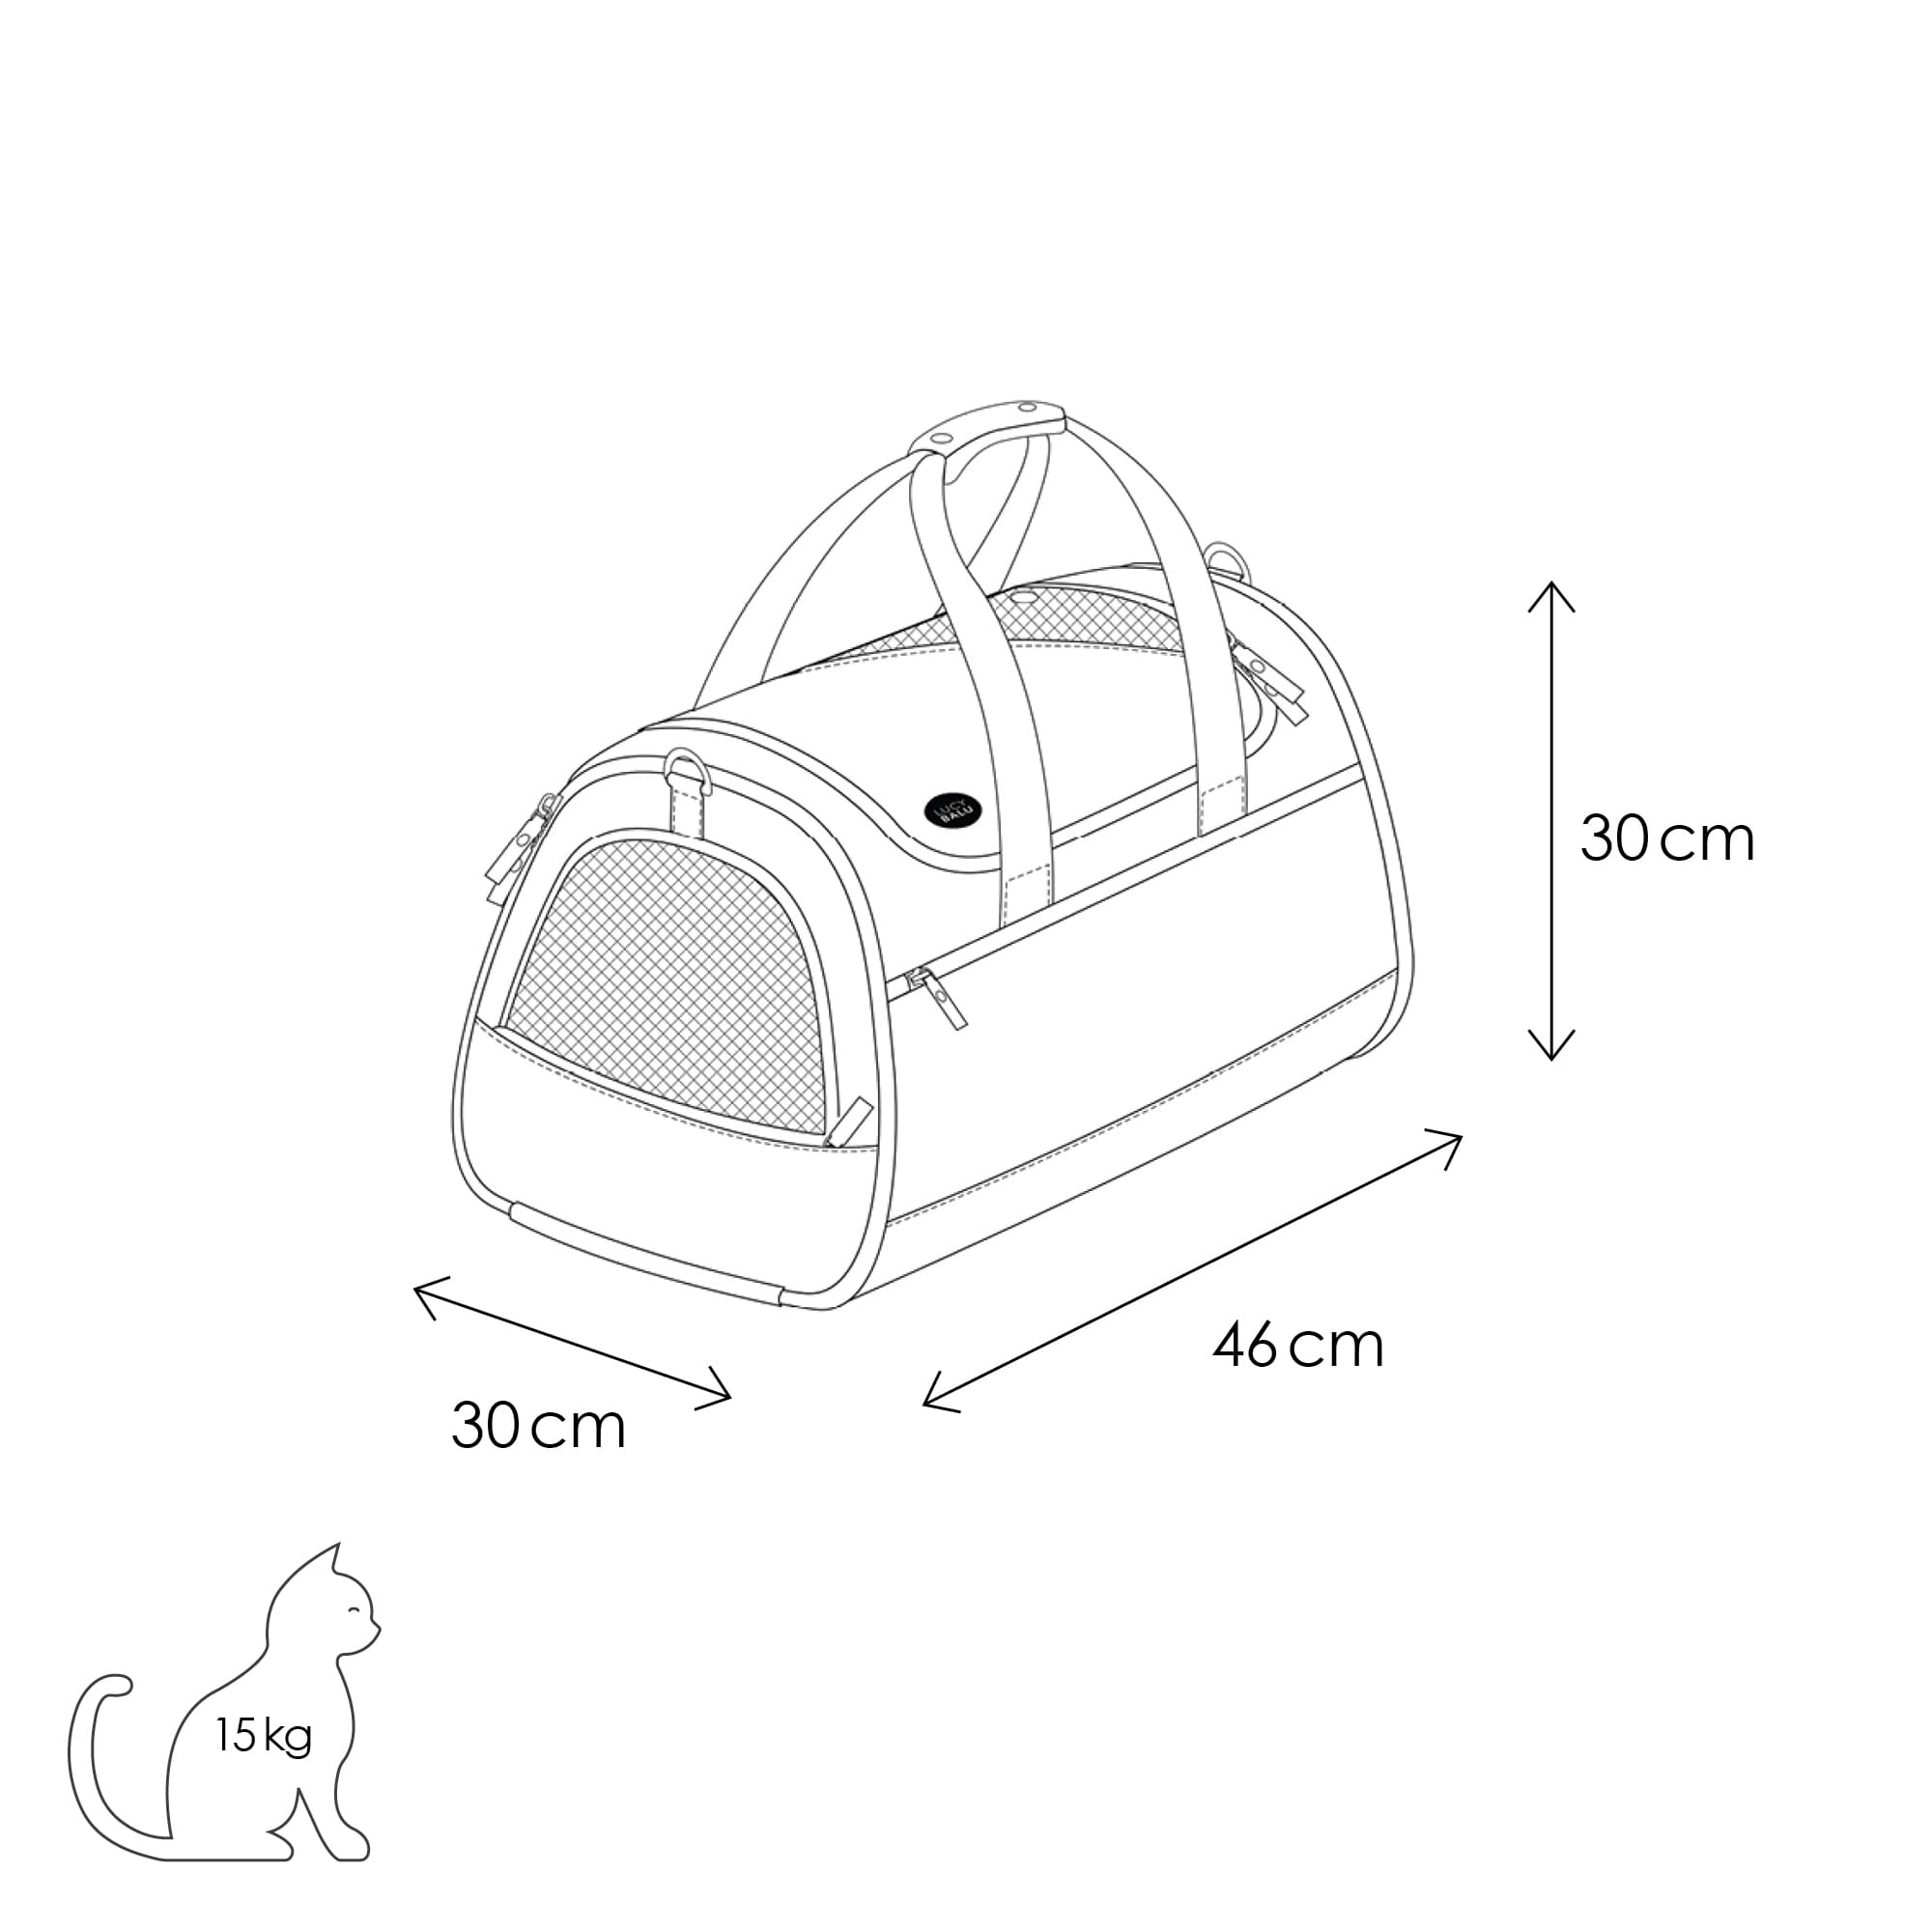 CHECK-IN Cat carrier bag